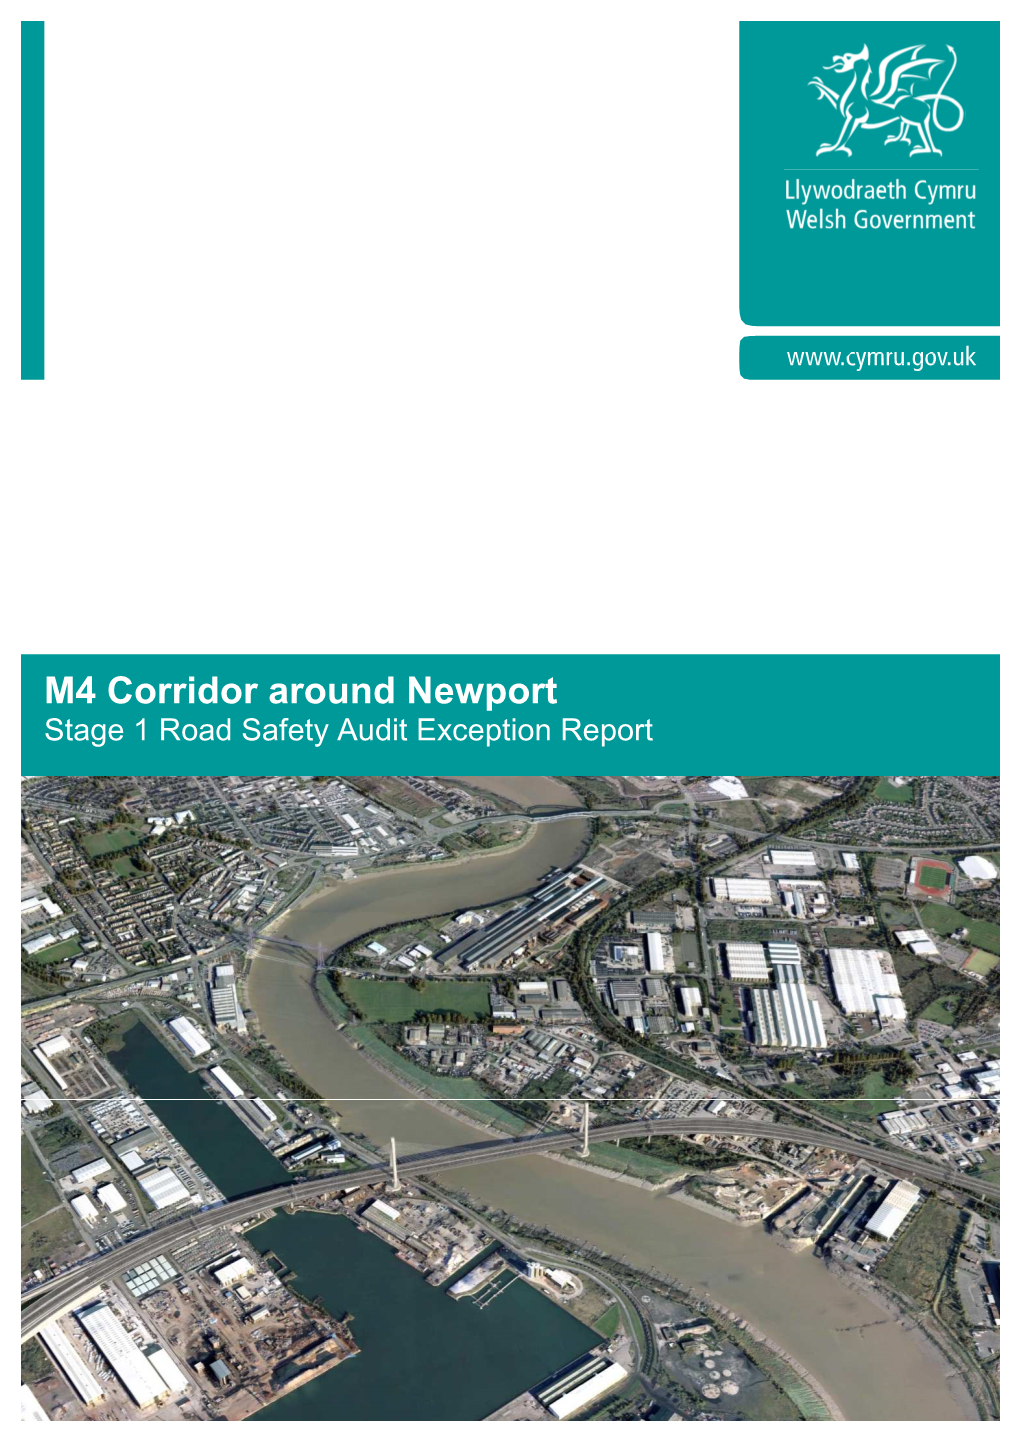 M4 Corridor Around Newport Stage 1 Road Safety Audit Exception Report Welsh Government M4 Corridor Around Newport Stage 1 Road Safety Audit Exception Report